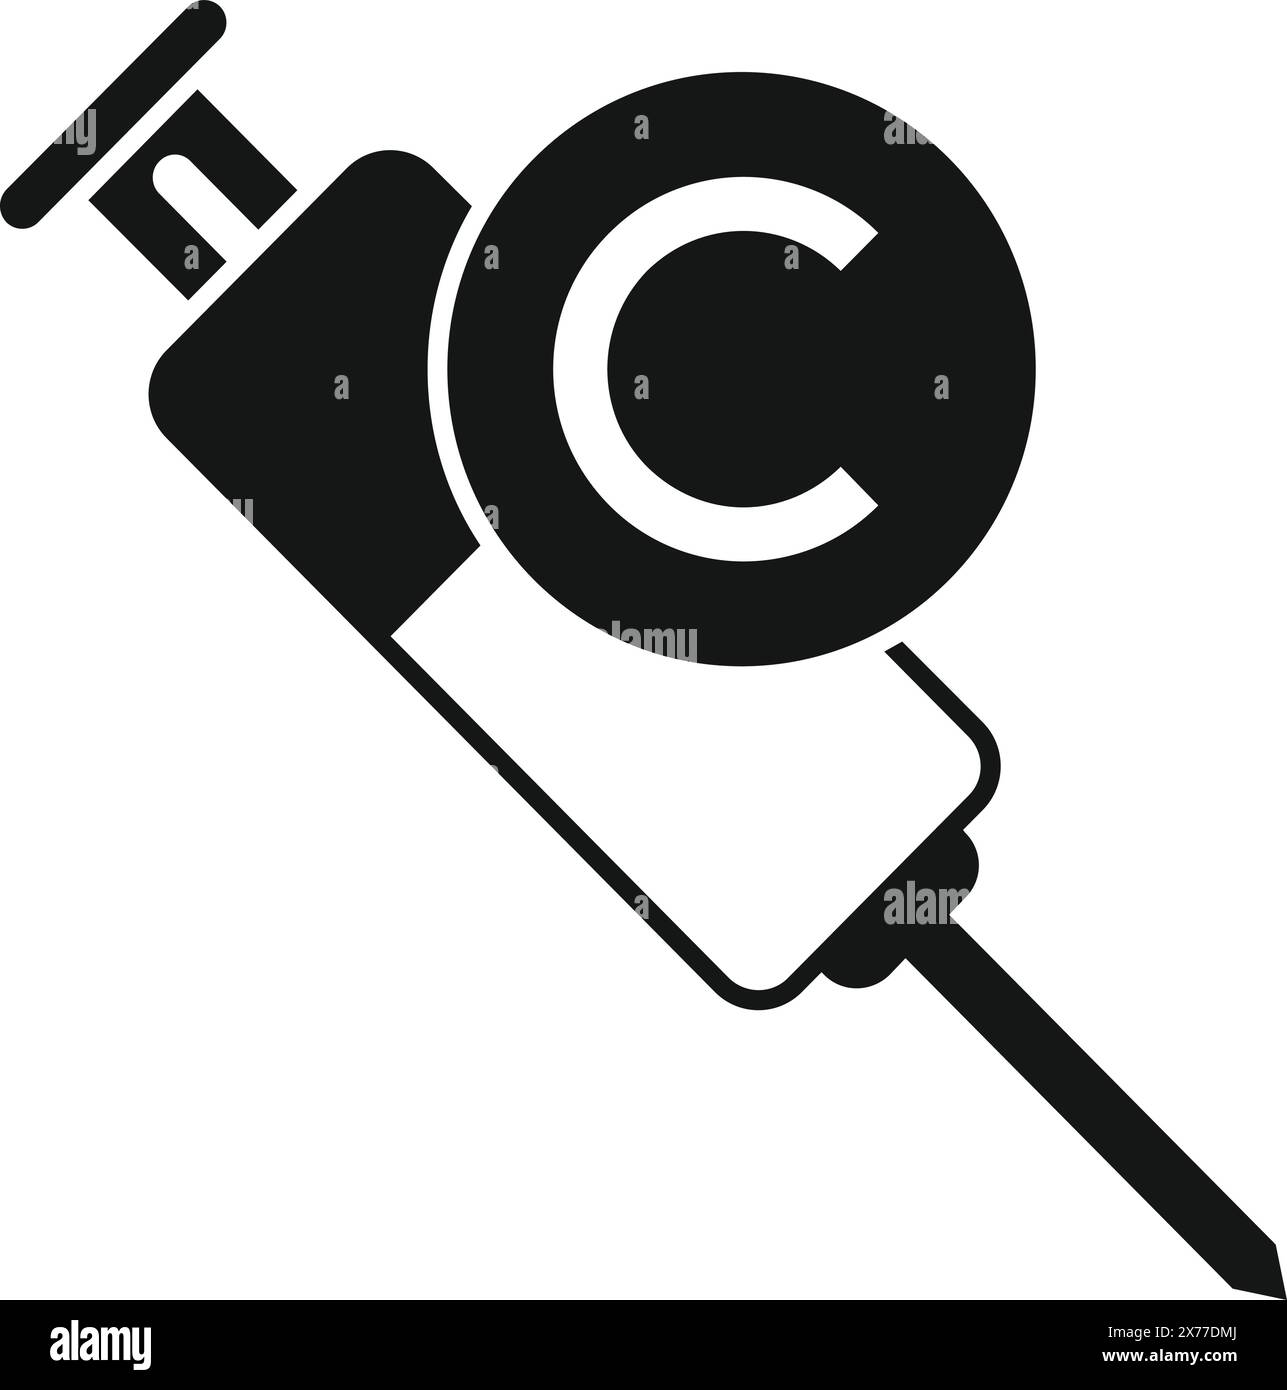 Black and white icon depicting a syringe with a copyright symbol, illustrating intellectual property protection Stock Vector